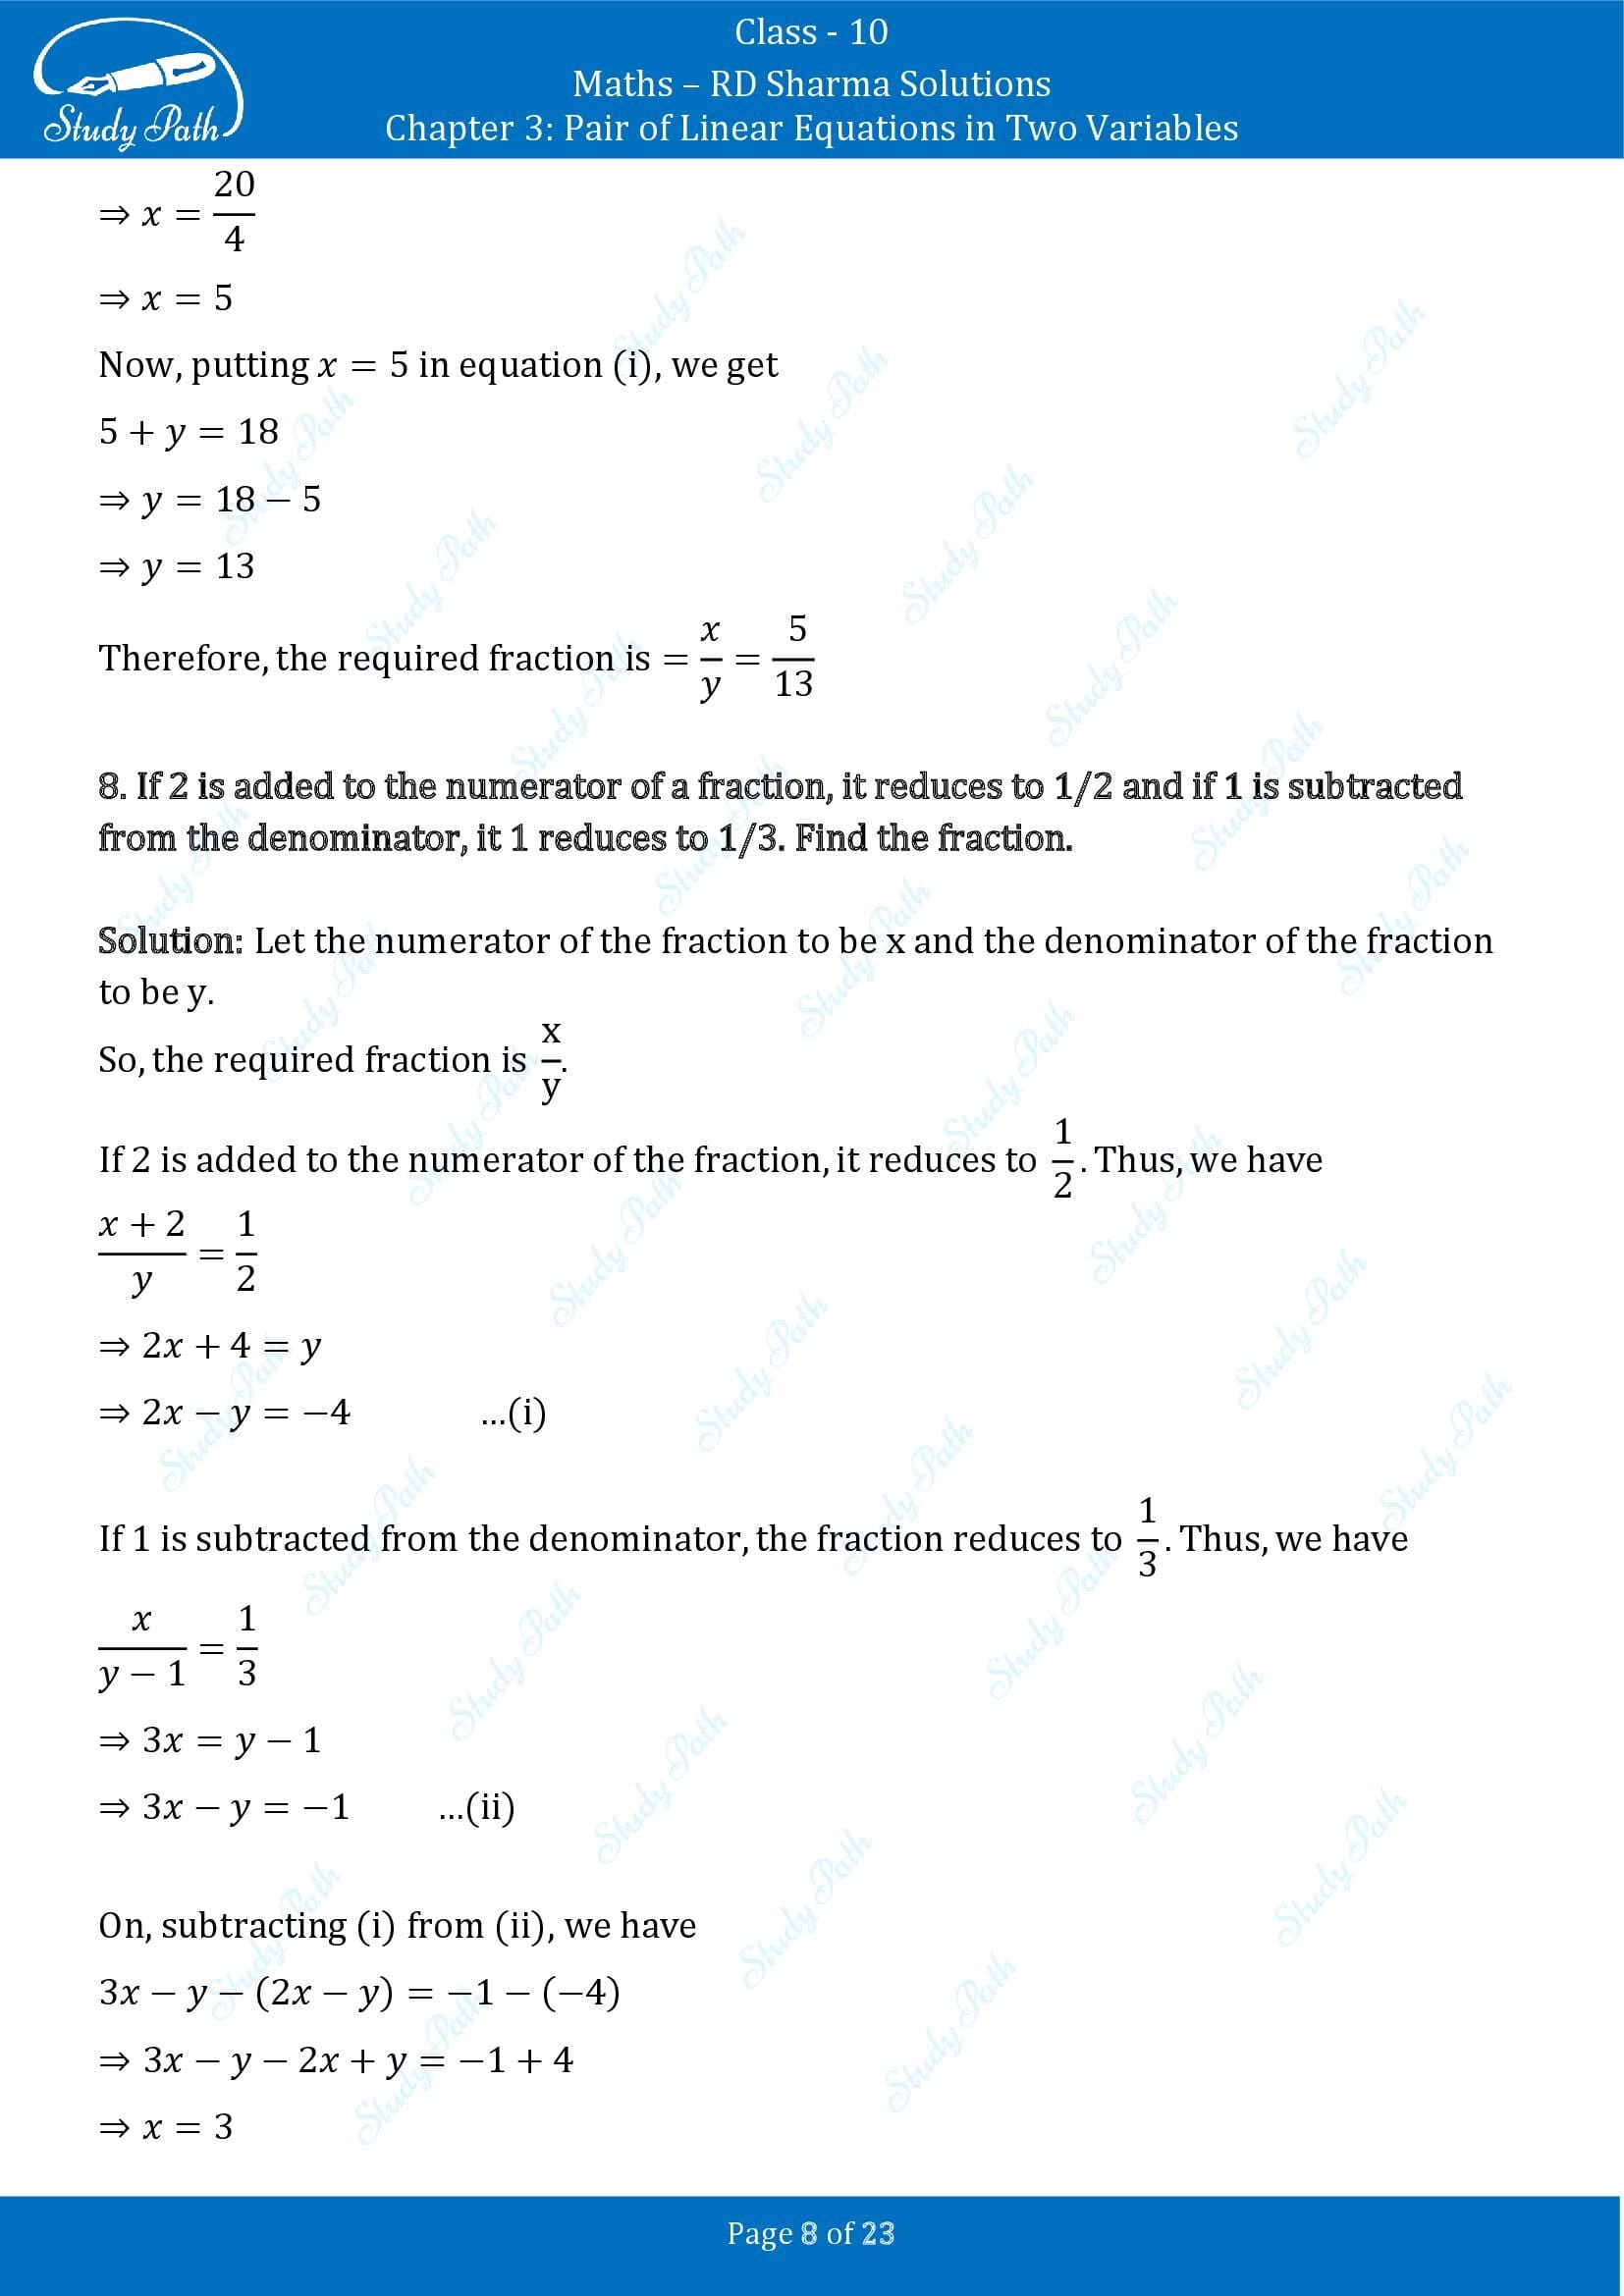 RD Sharma Solutions Class 10 Chapter 3 Pair of Linear Equations in Two Variables Exercise 3.8 00008